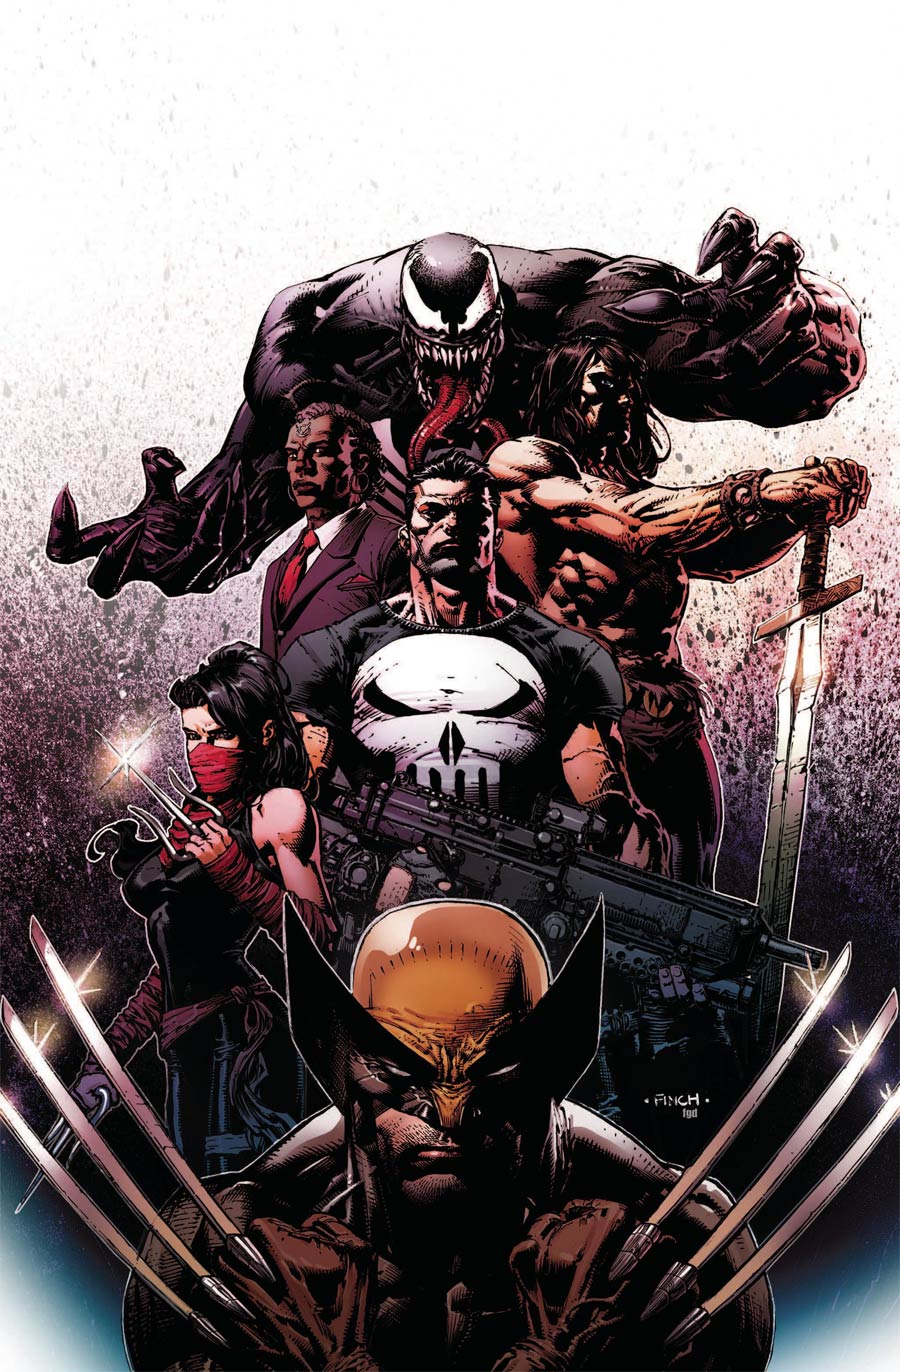 Savage Avengers #1 By David Finch Poster